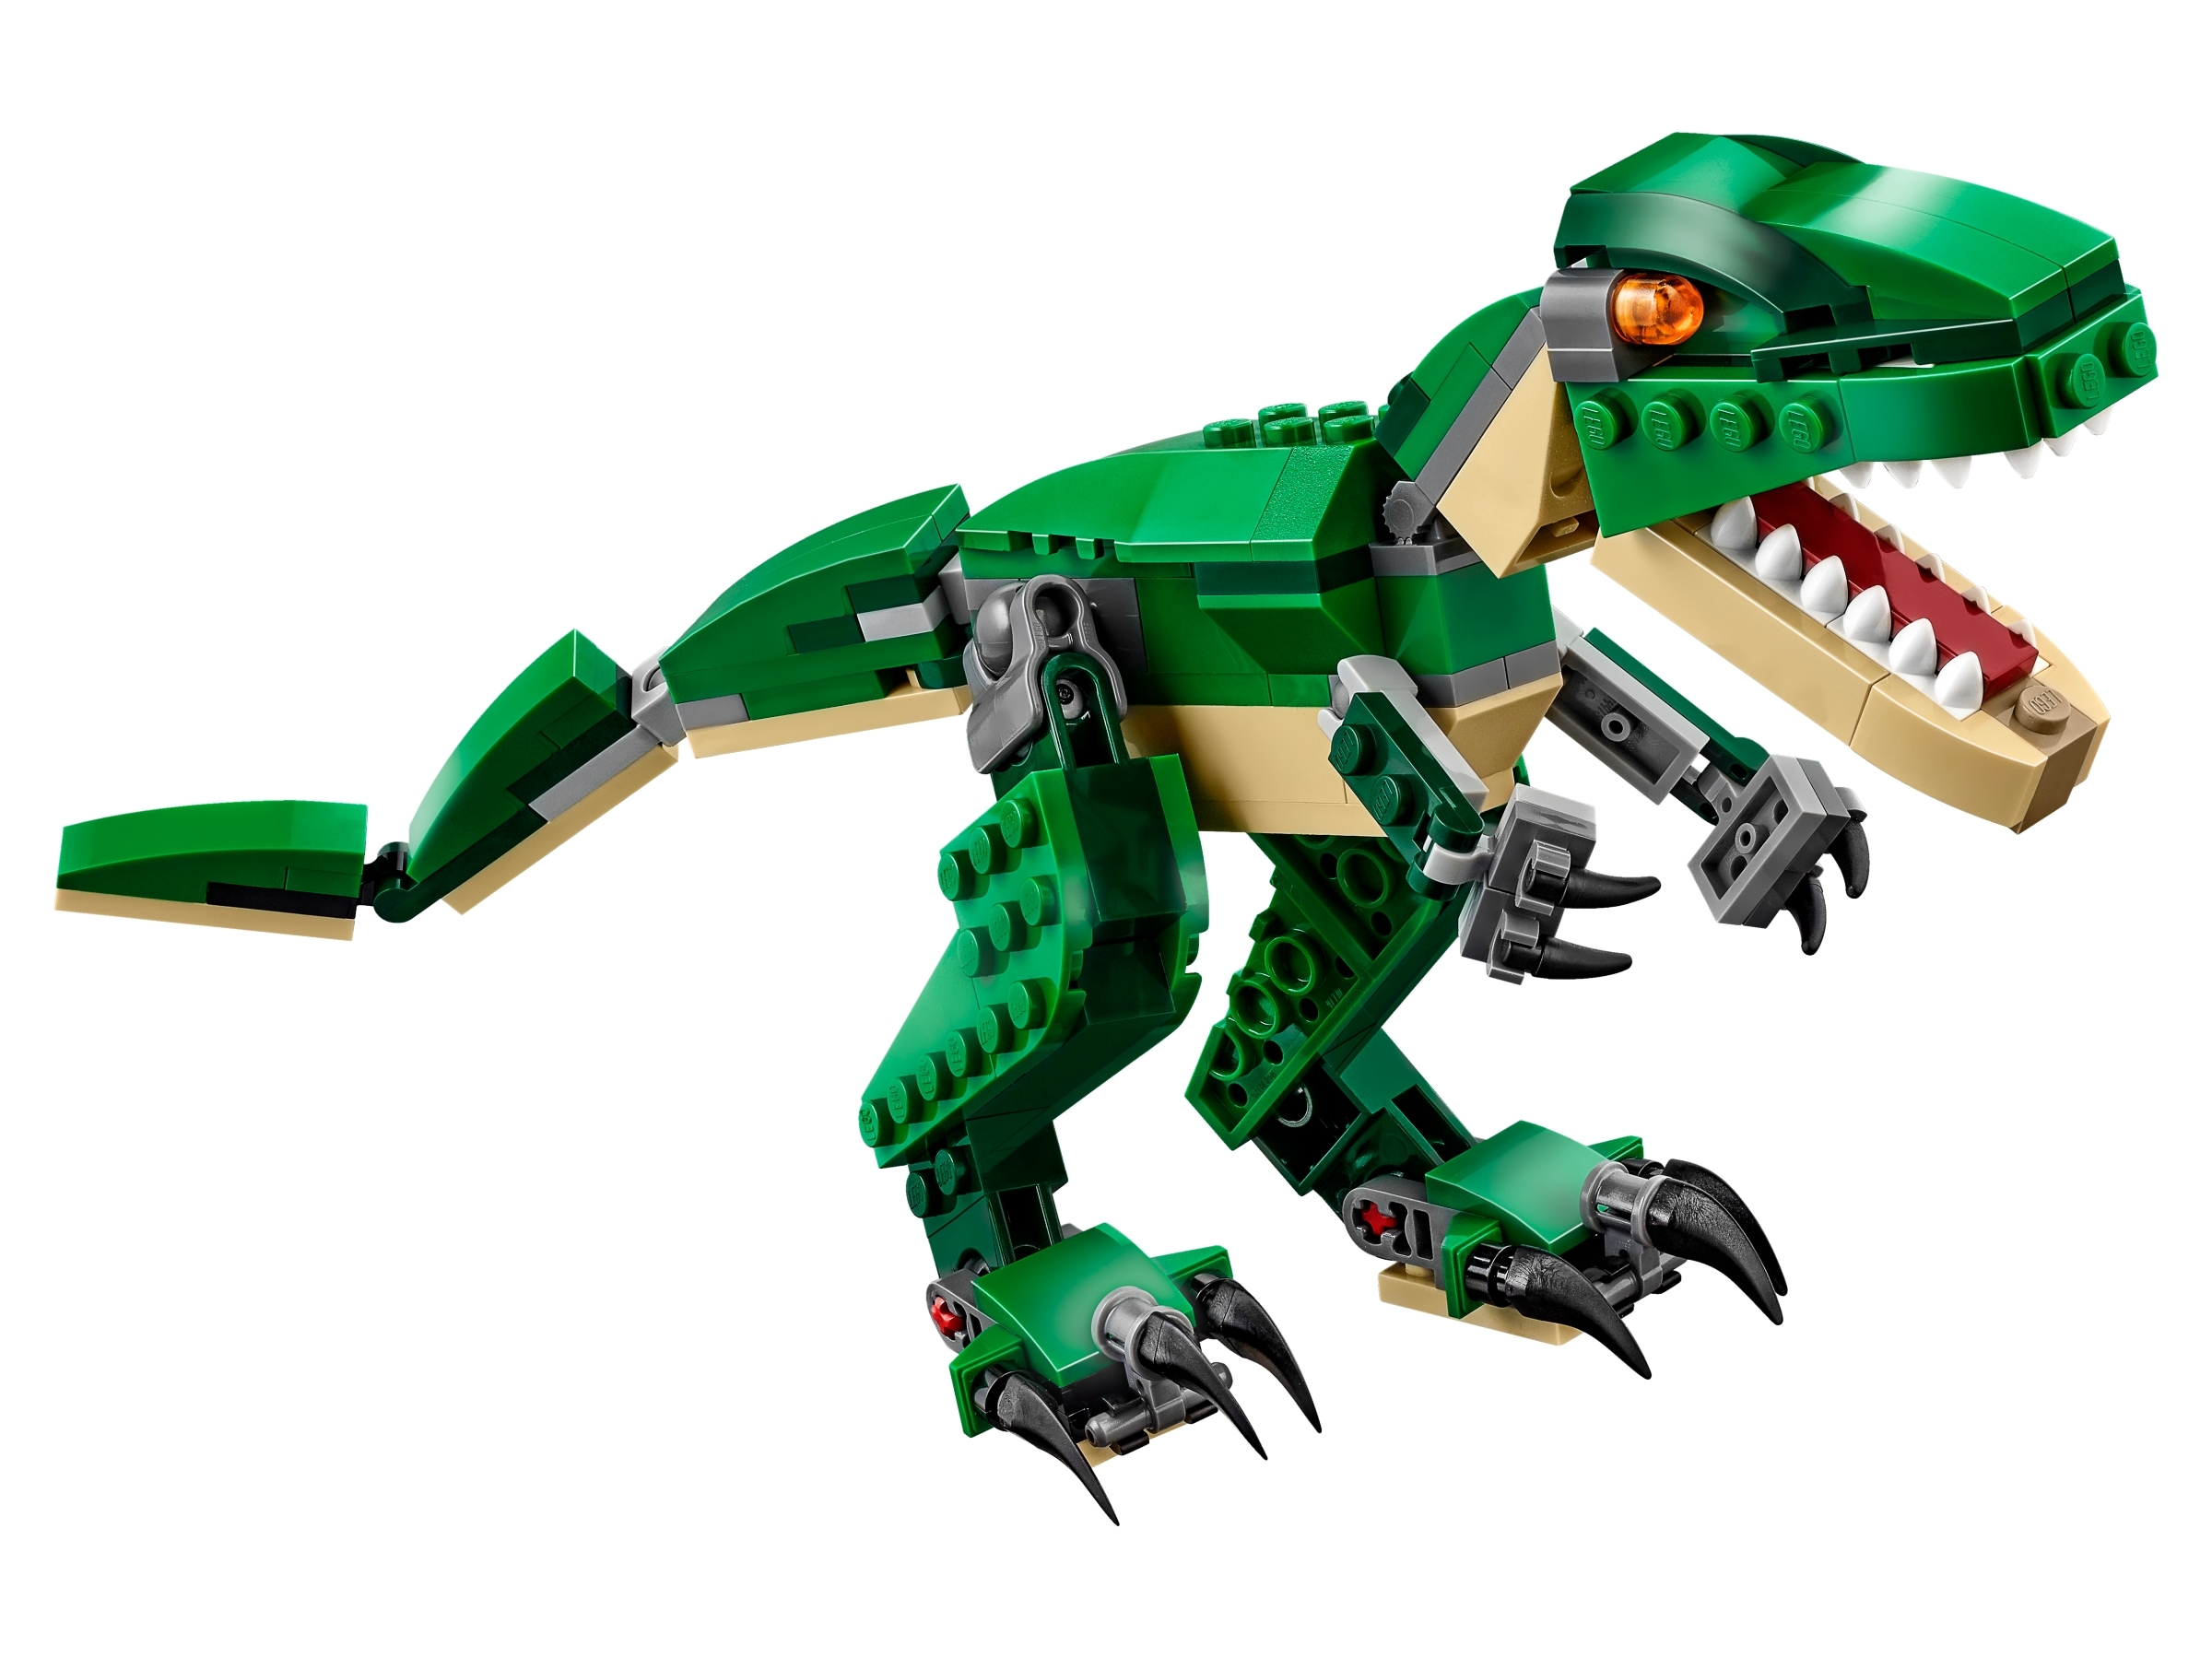 LEGO Creator 3in1 Mighty Dinosaur Toy, T. rex to Triceratops to Pterodactyl  Figures, Great Gift for 7-12 Year Olds